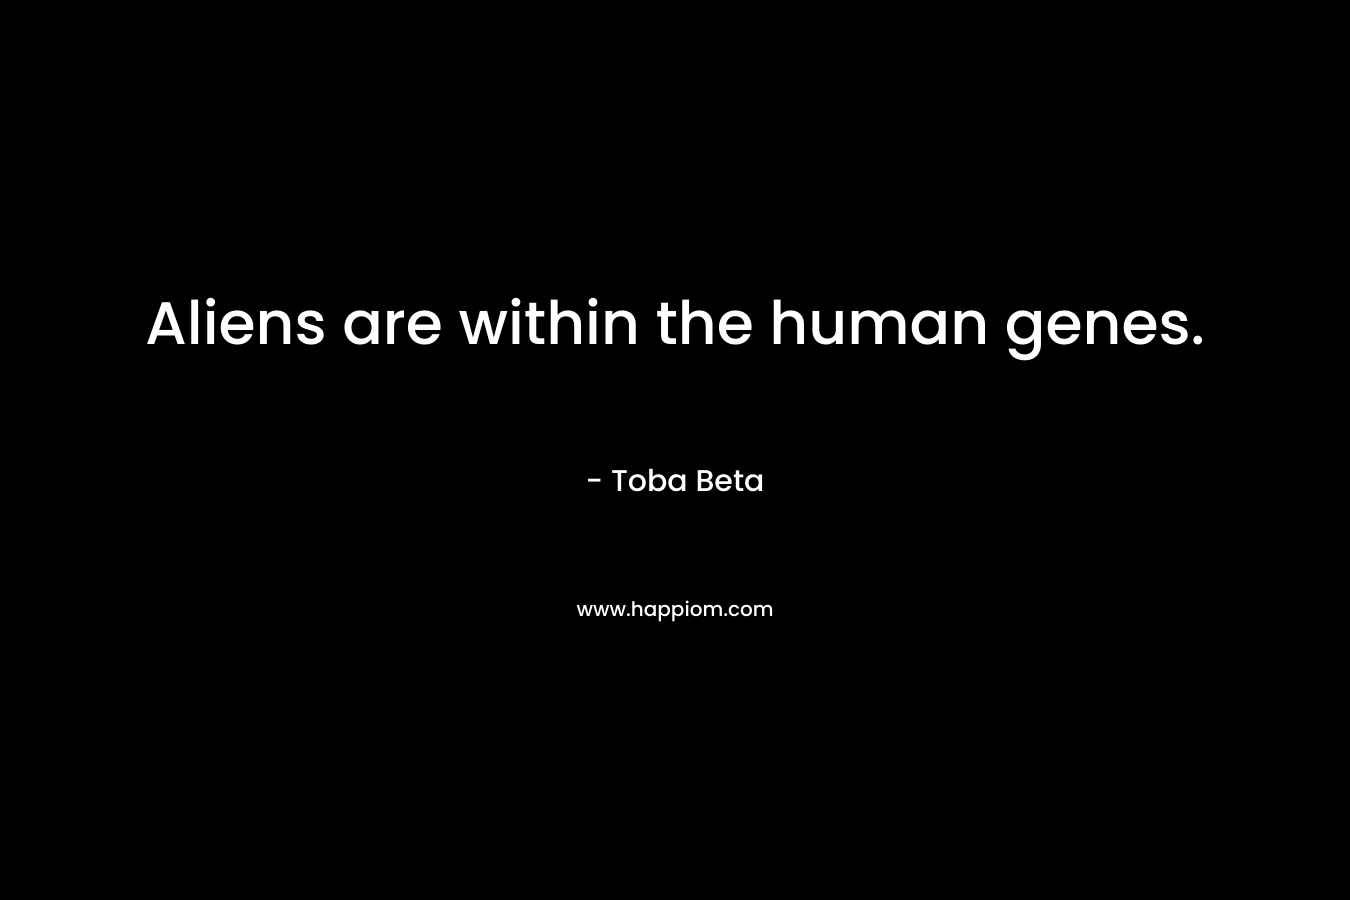 Aliens are within the human genes.